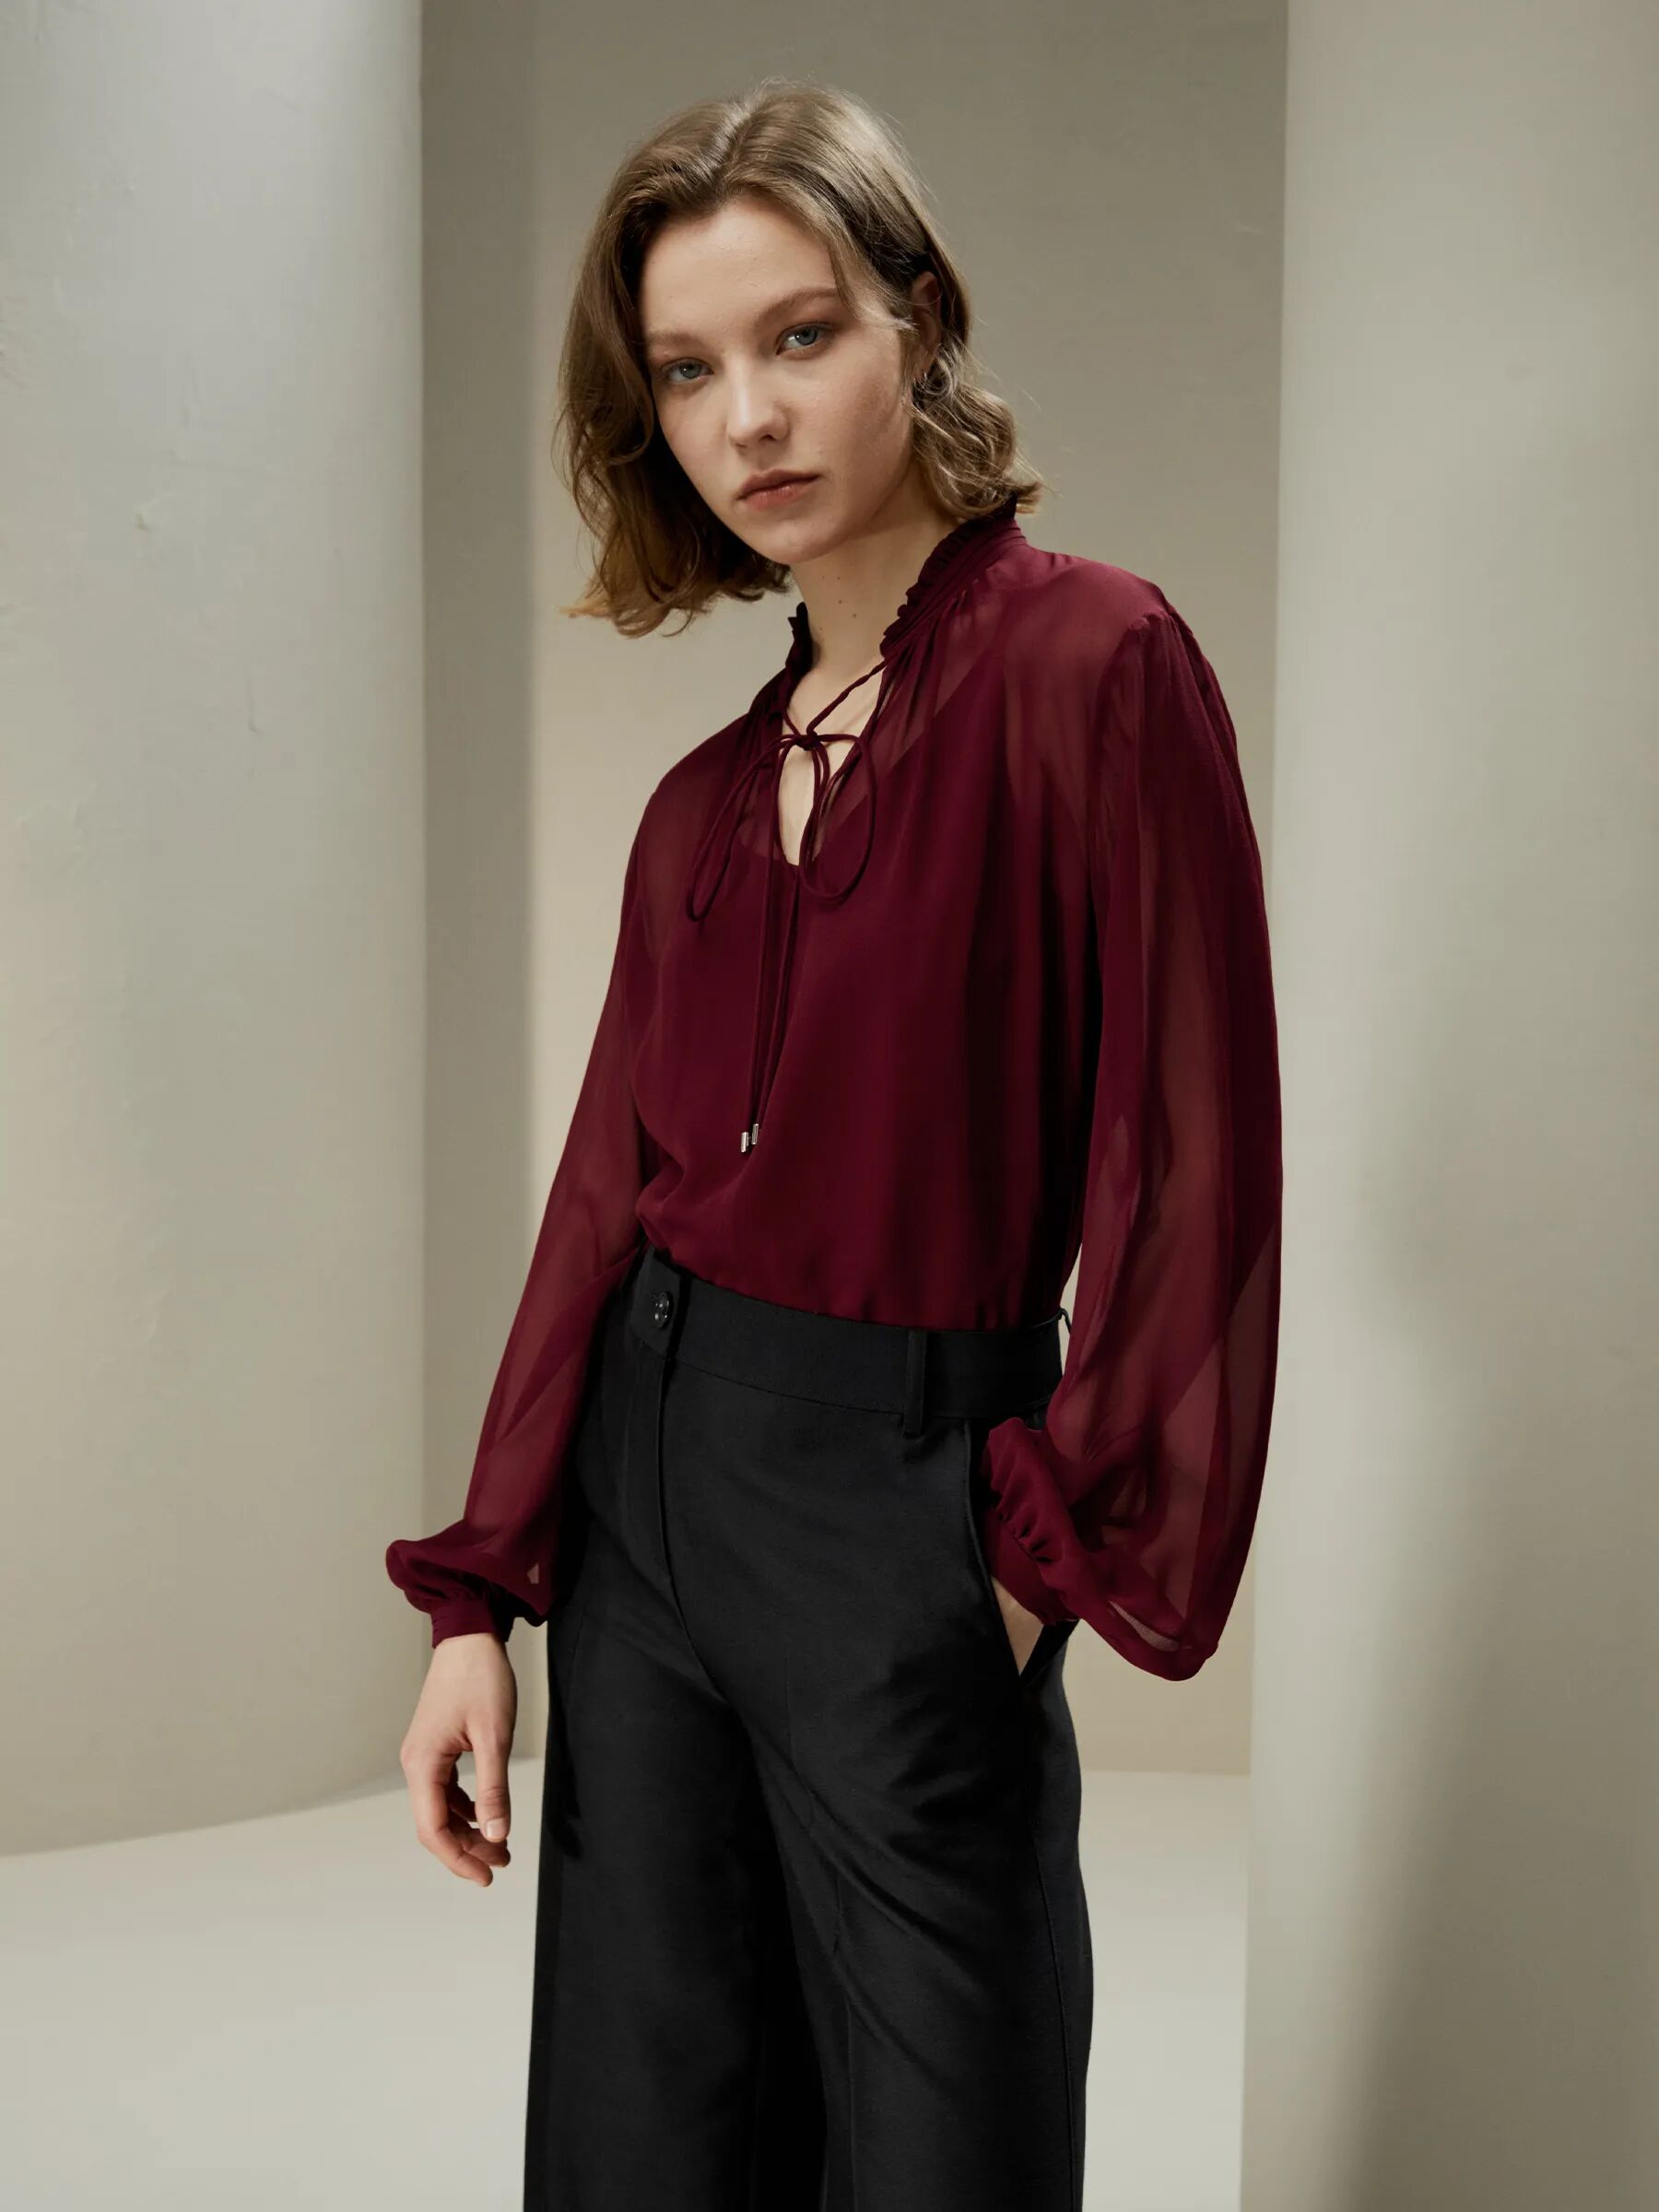 LILYSILK Business Maroon Burgundy Blouse   Chiffon Lace Up   Silk Women Red Soft And Semi-Sheer Georgette Popover With Tie Front Drawstring Light M